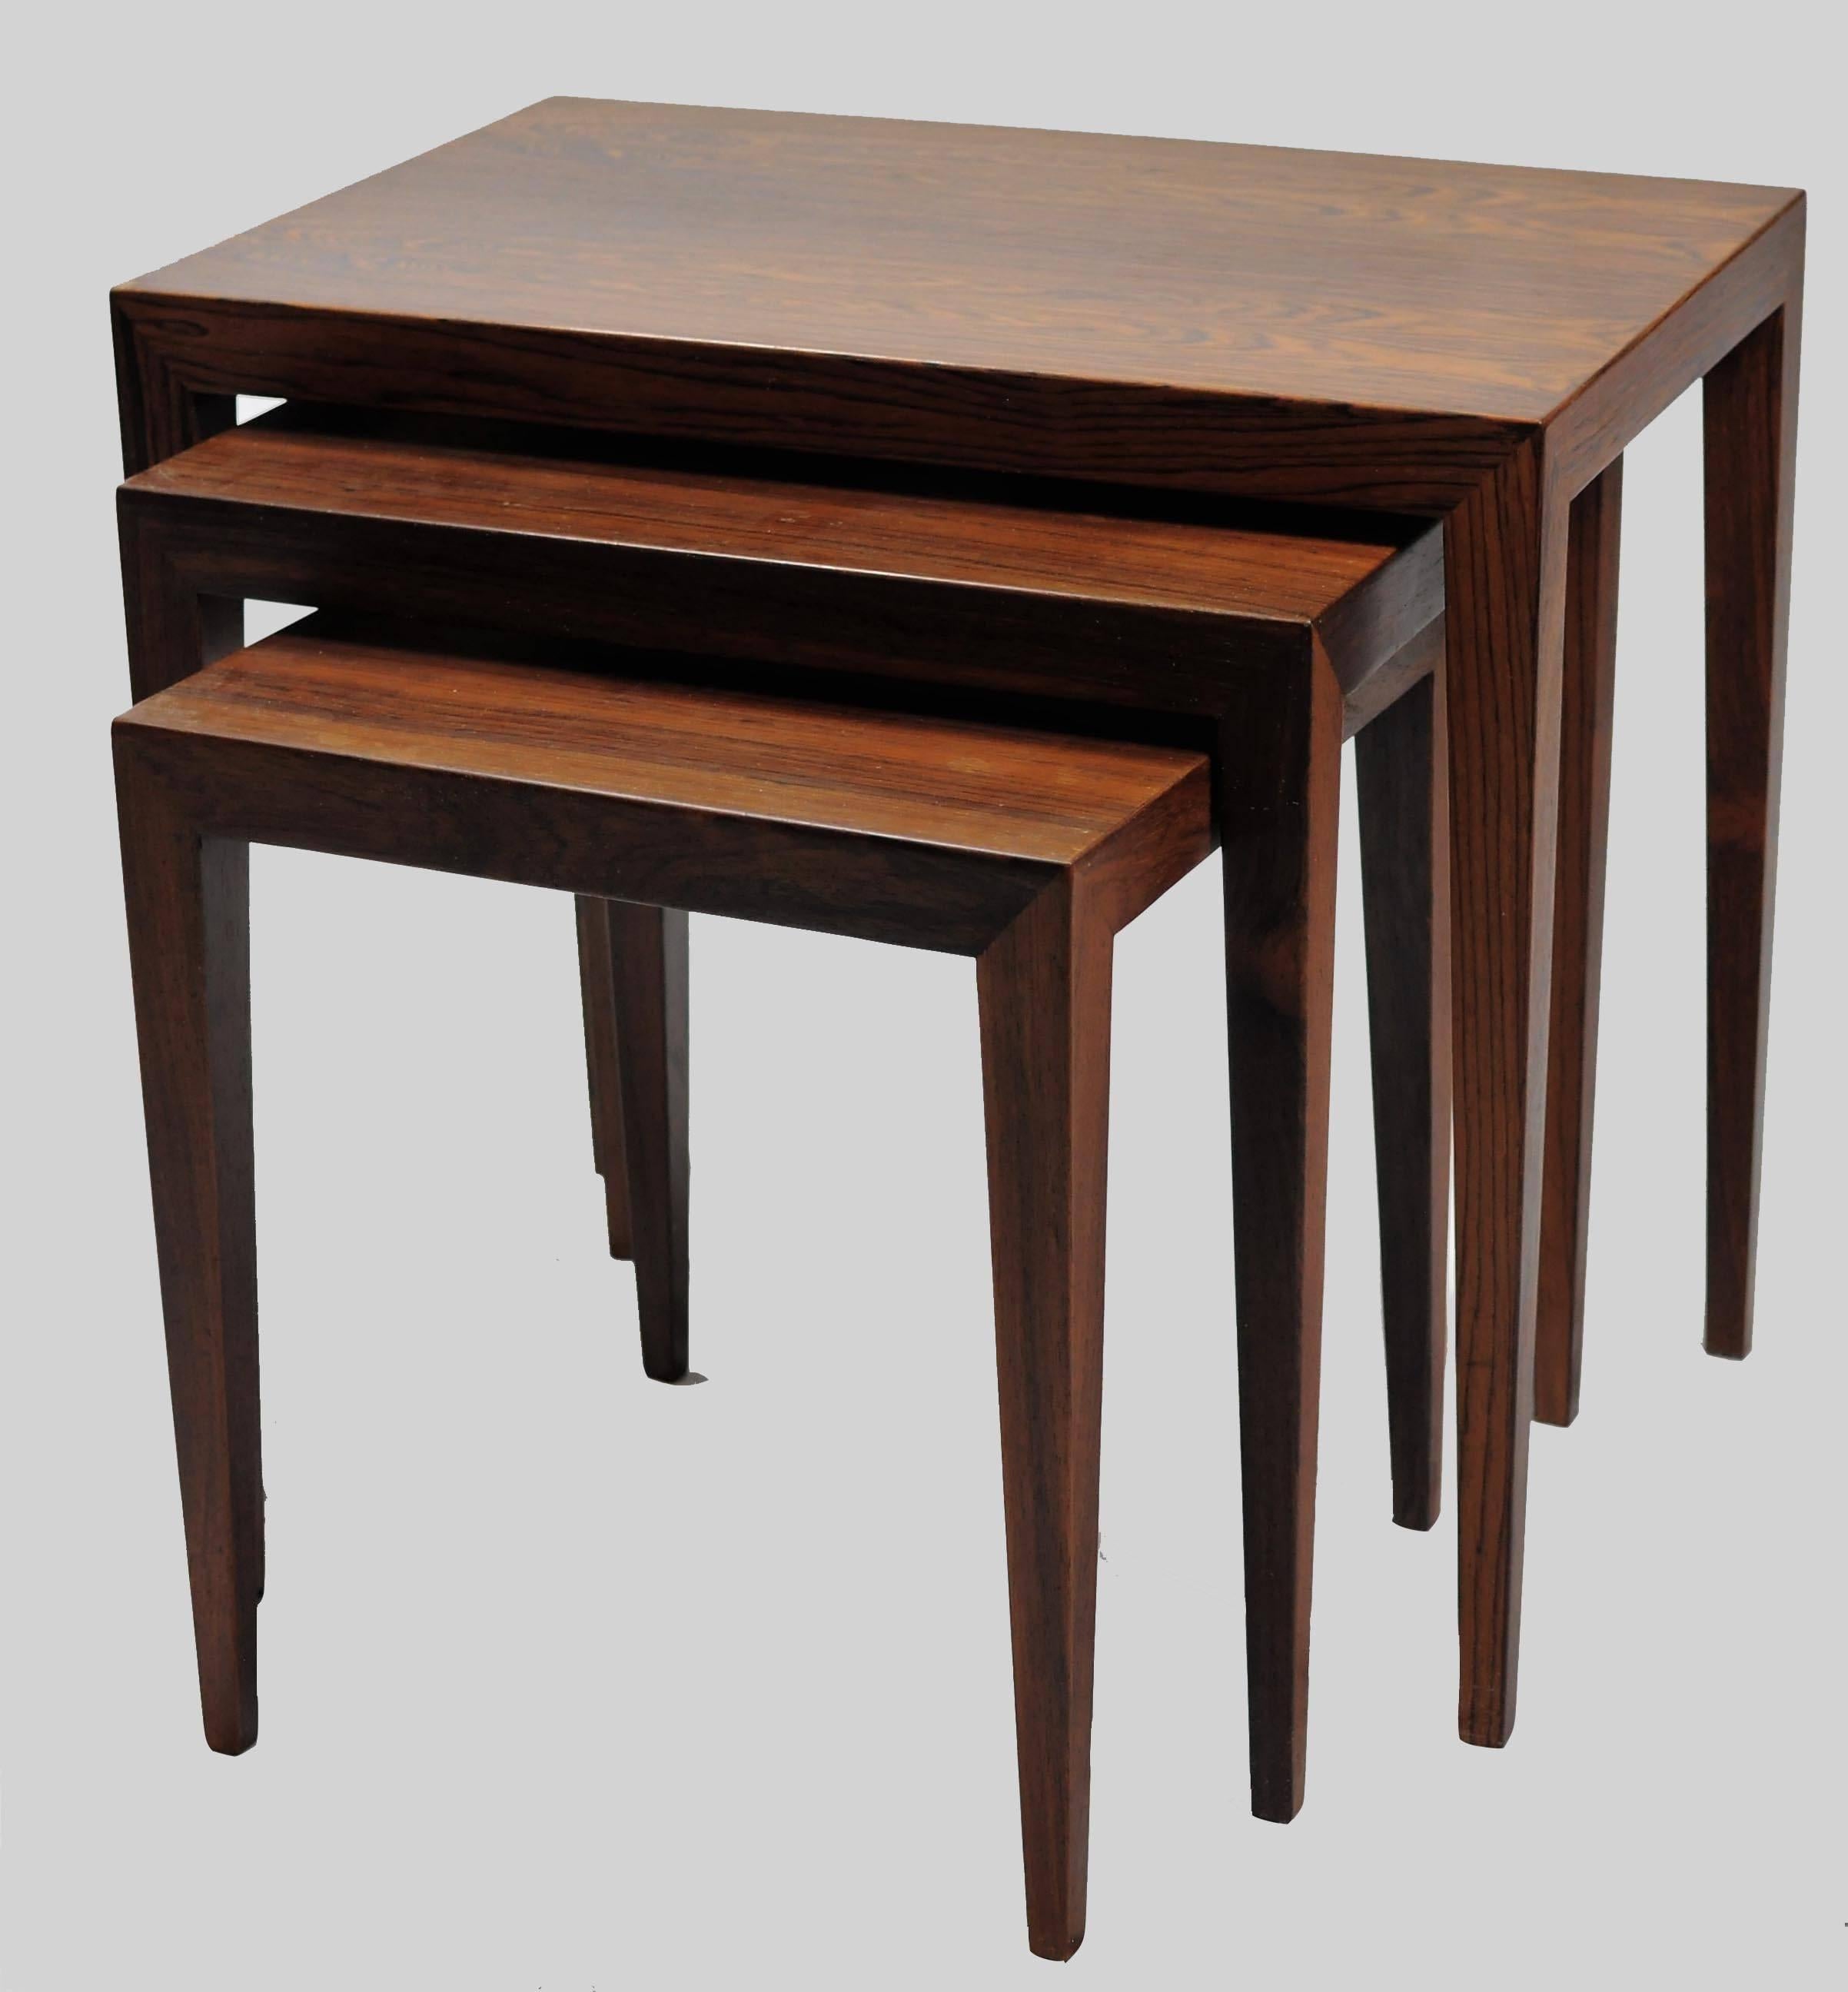 Set of three nesting tables in rosewood designed by Severin Hansen Jr for Haslev Møbelfabrik.

Danish furniture designer Severin Hansen Jr. is best remembered for his table and desk designs in the classic, Danish midcentury modern style. In the